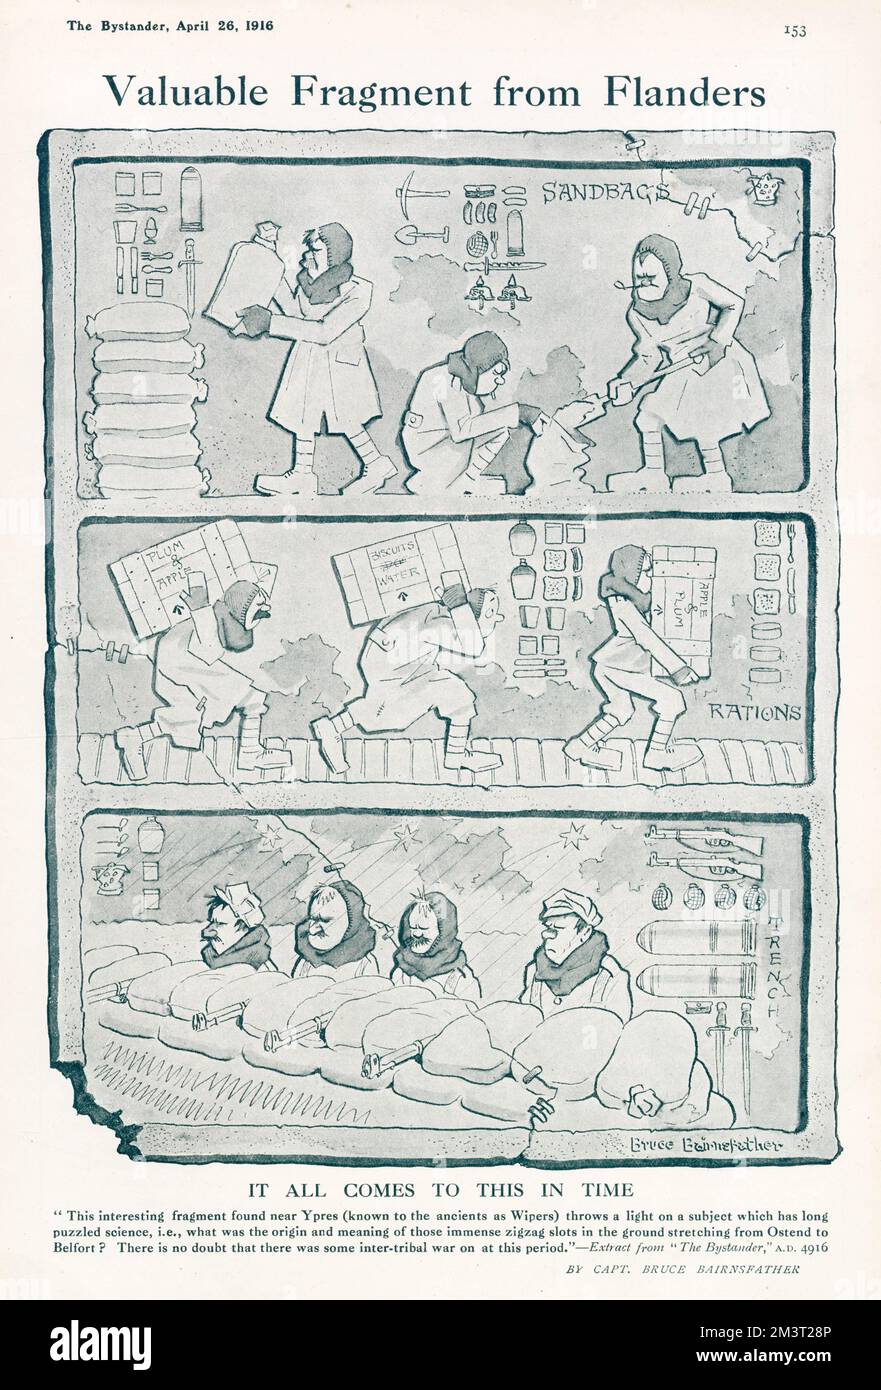 Cartoon by Bruce Bairnsfather in the style of Egyptian Hieroglyphs. Showing British soldiers making sandbags, bringing in ration supplies and ready to fight in the trenches. Stock Photo